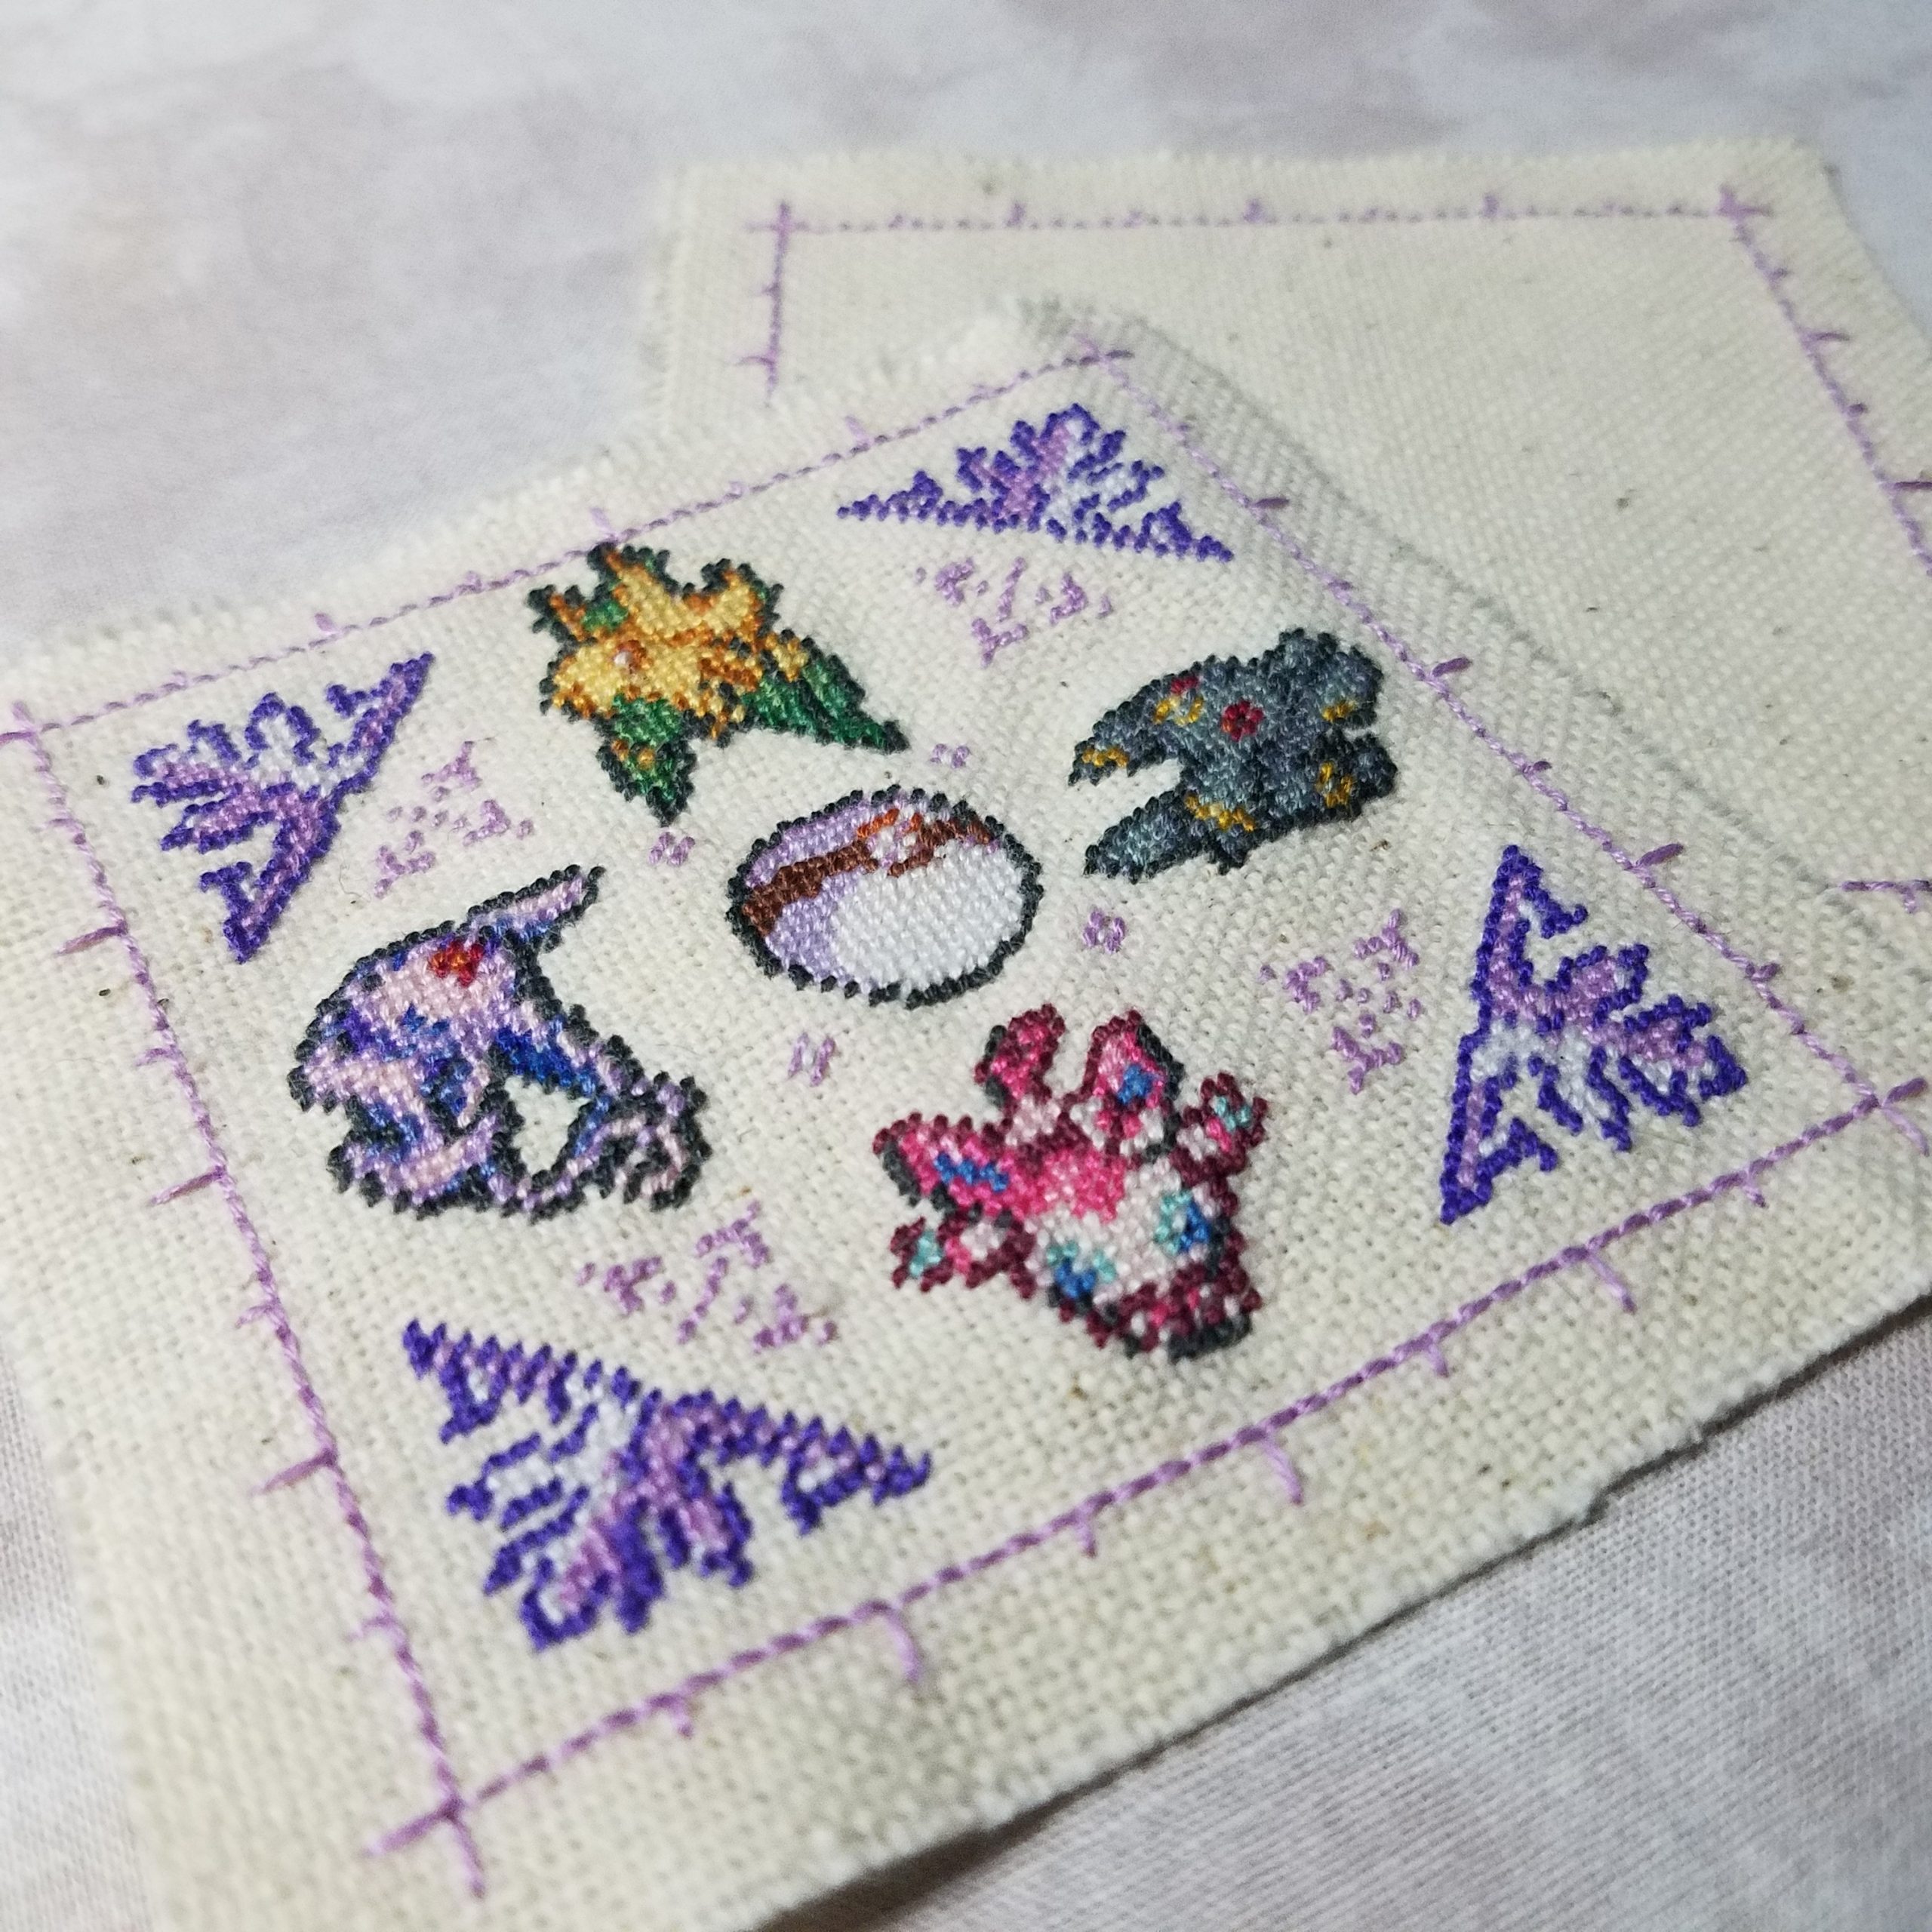 Petit Point - Similar But Different to Cross Stitch and Smaller